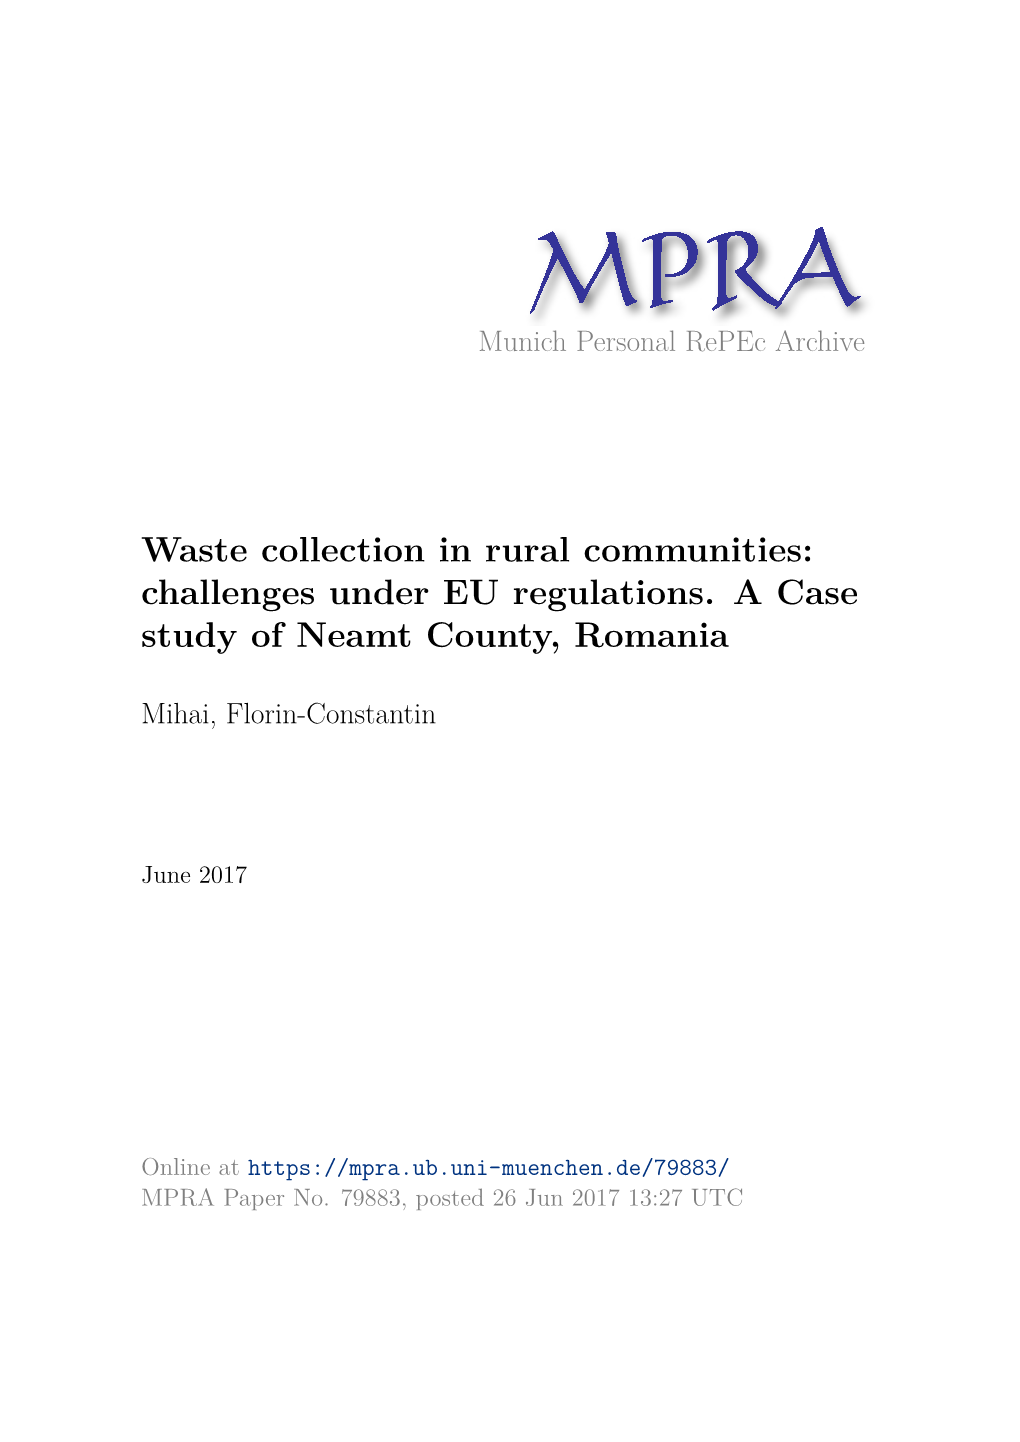 Waste Collection in Rural Communities: Challenges Under EU Regulations. a Case Study of Neamt County, Romania